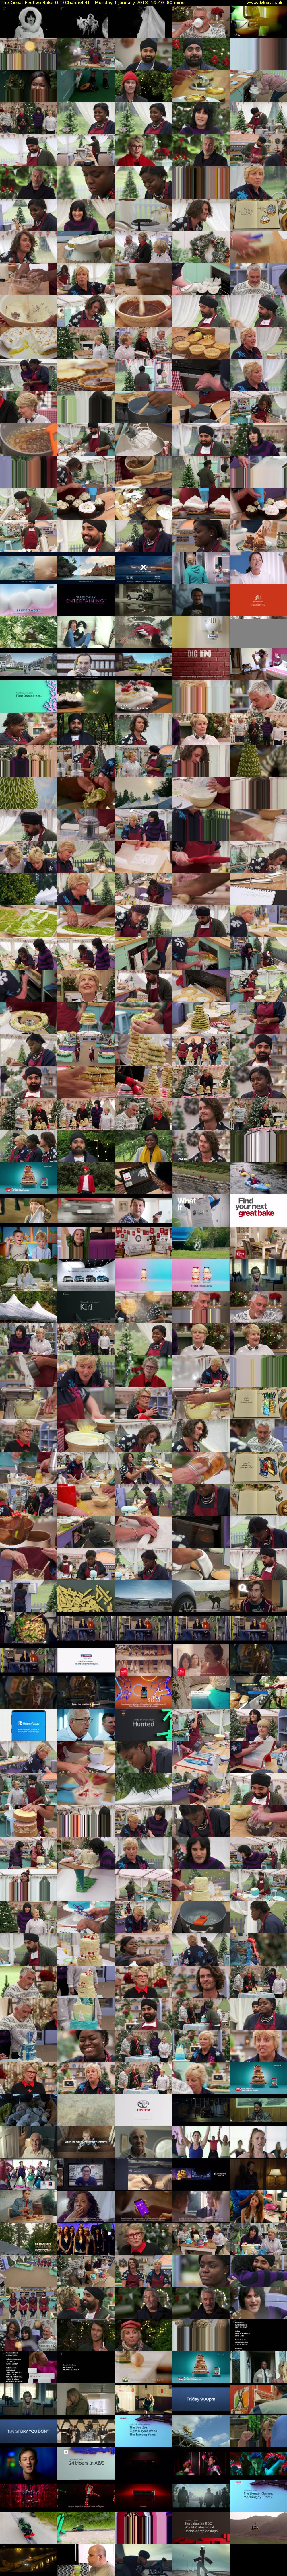 The Great Festive Bake Off (Channel 4) Monday 1 January 2018 19:40 - 21:00